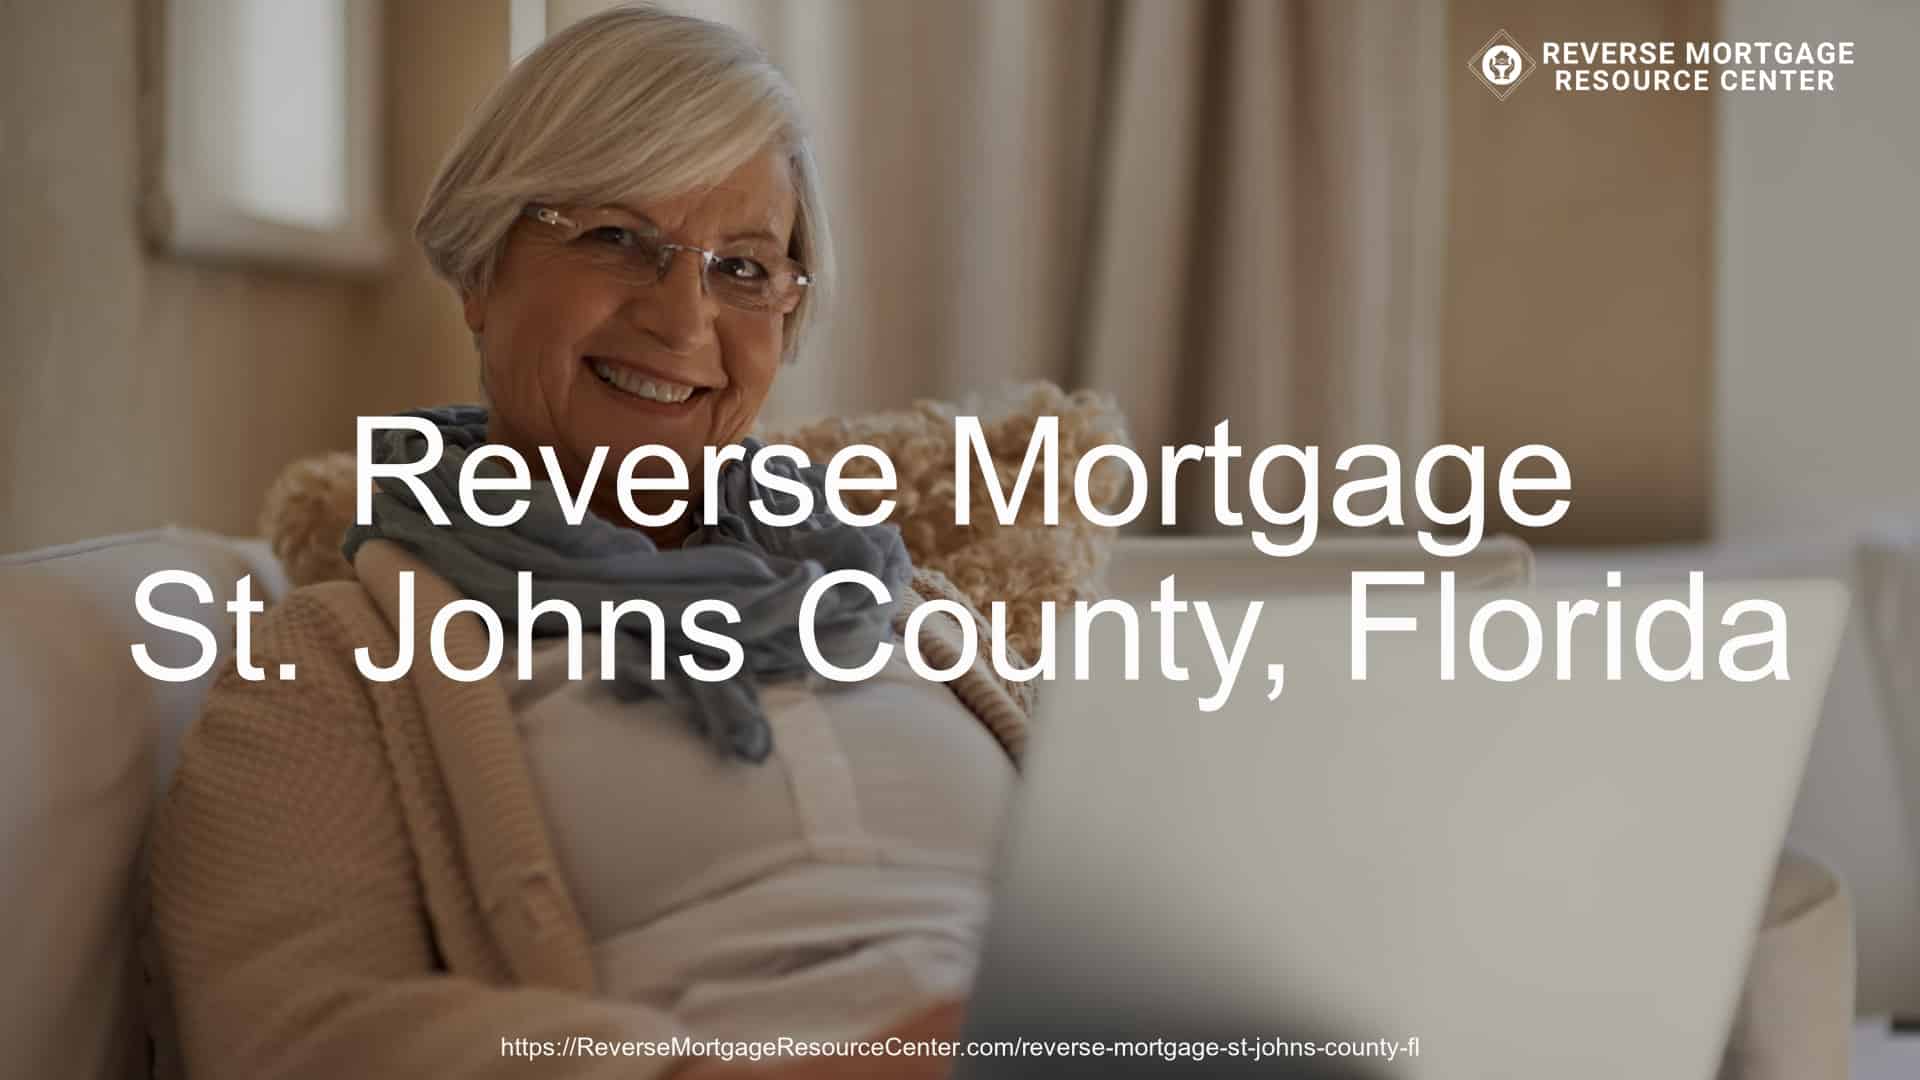 Reverse Mortgage Loans in St. Johns County Florida